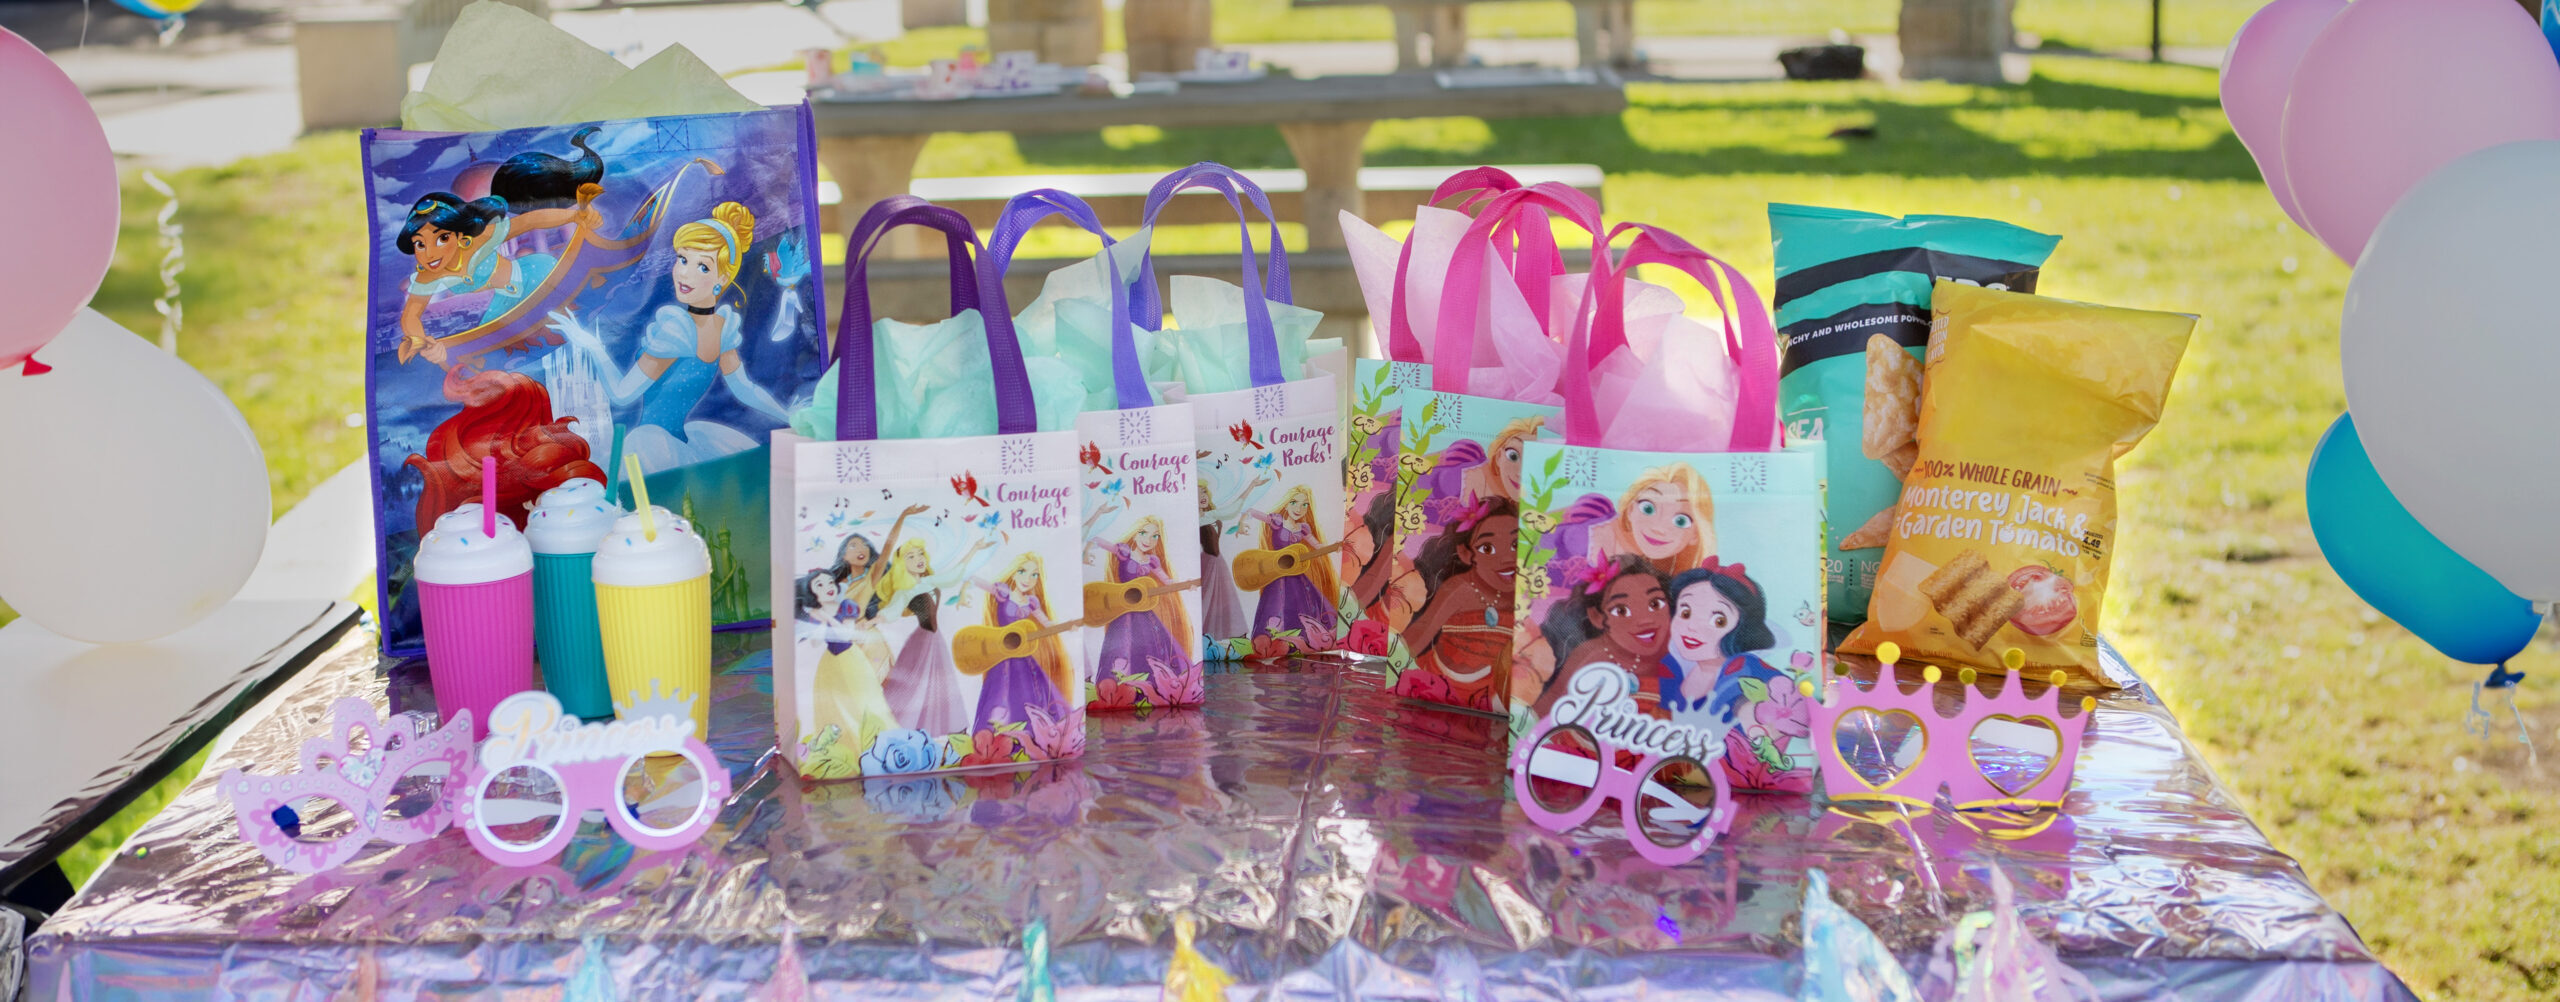 Disney princess mini tote bags on a table for a birthday party